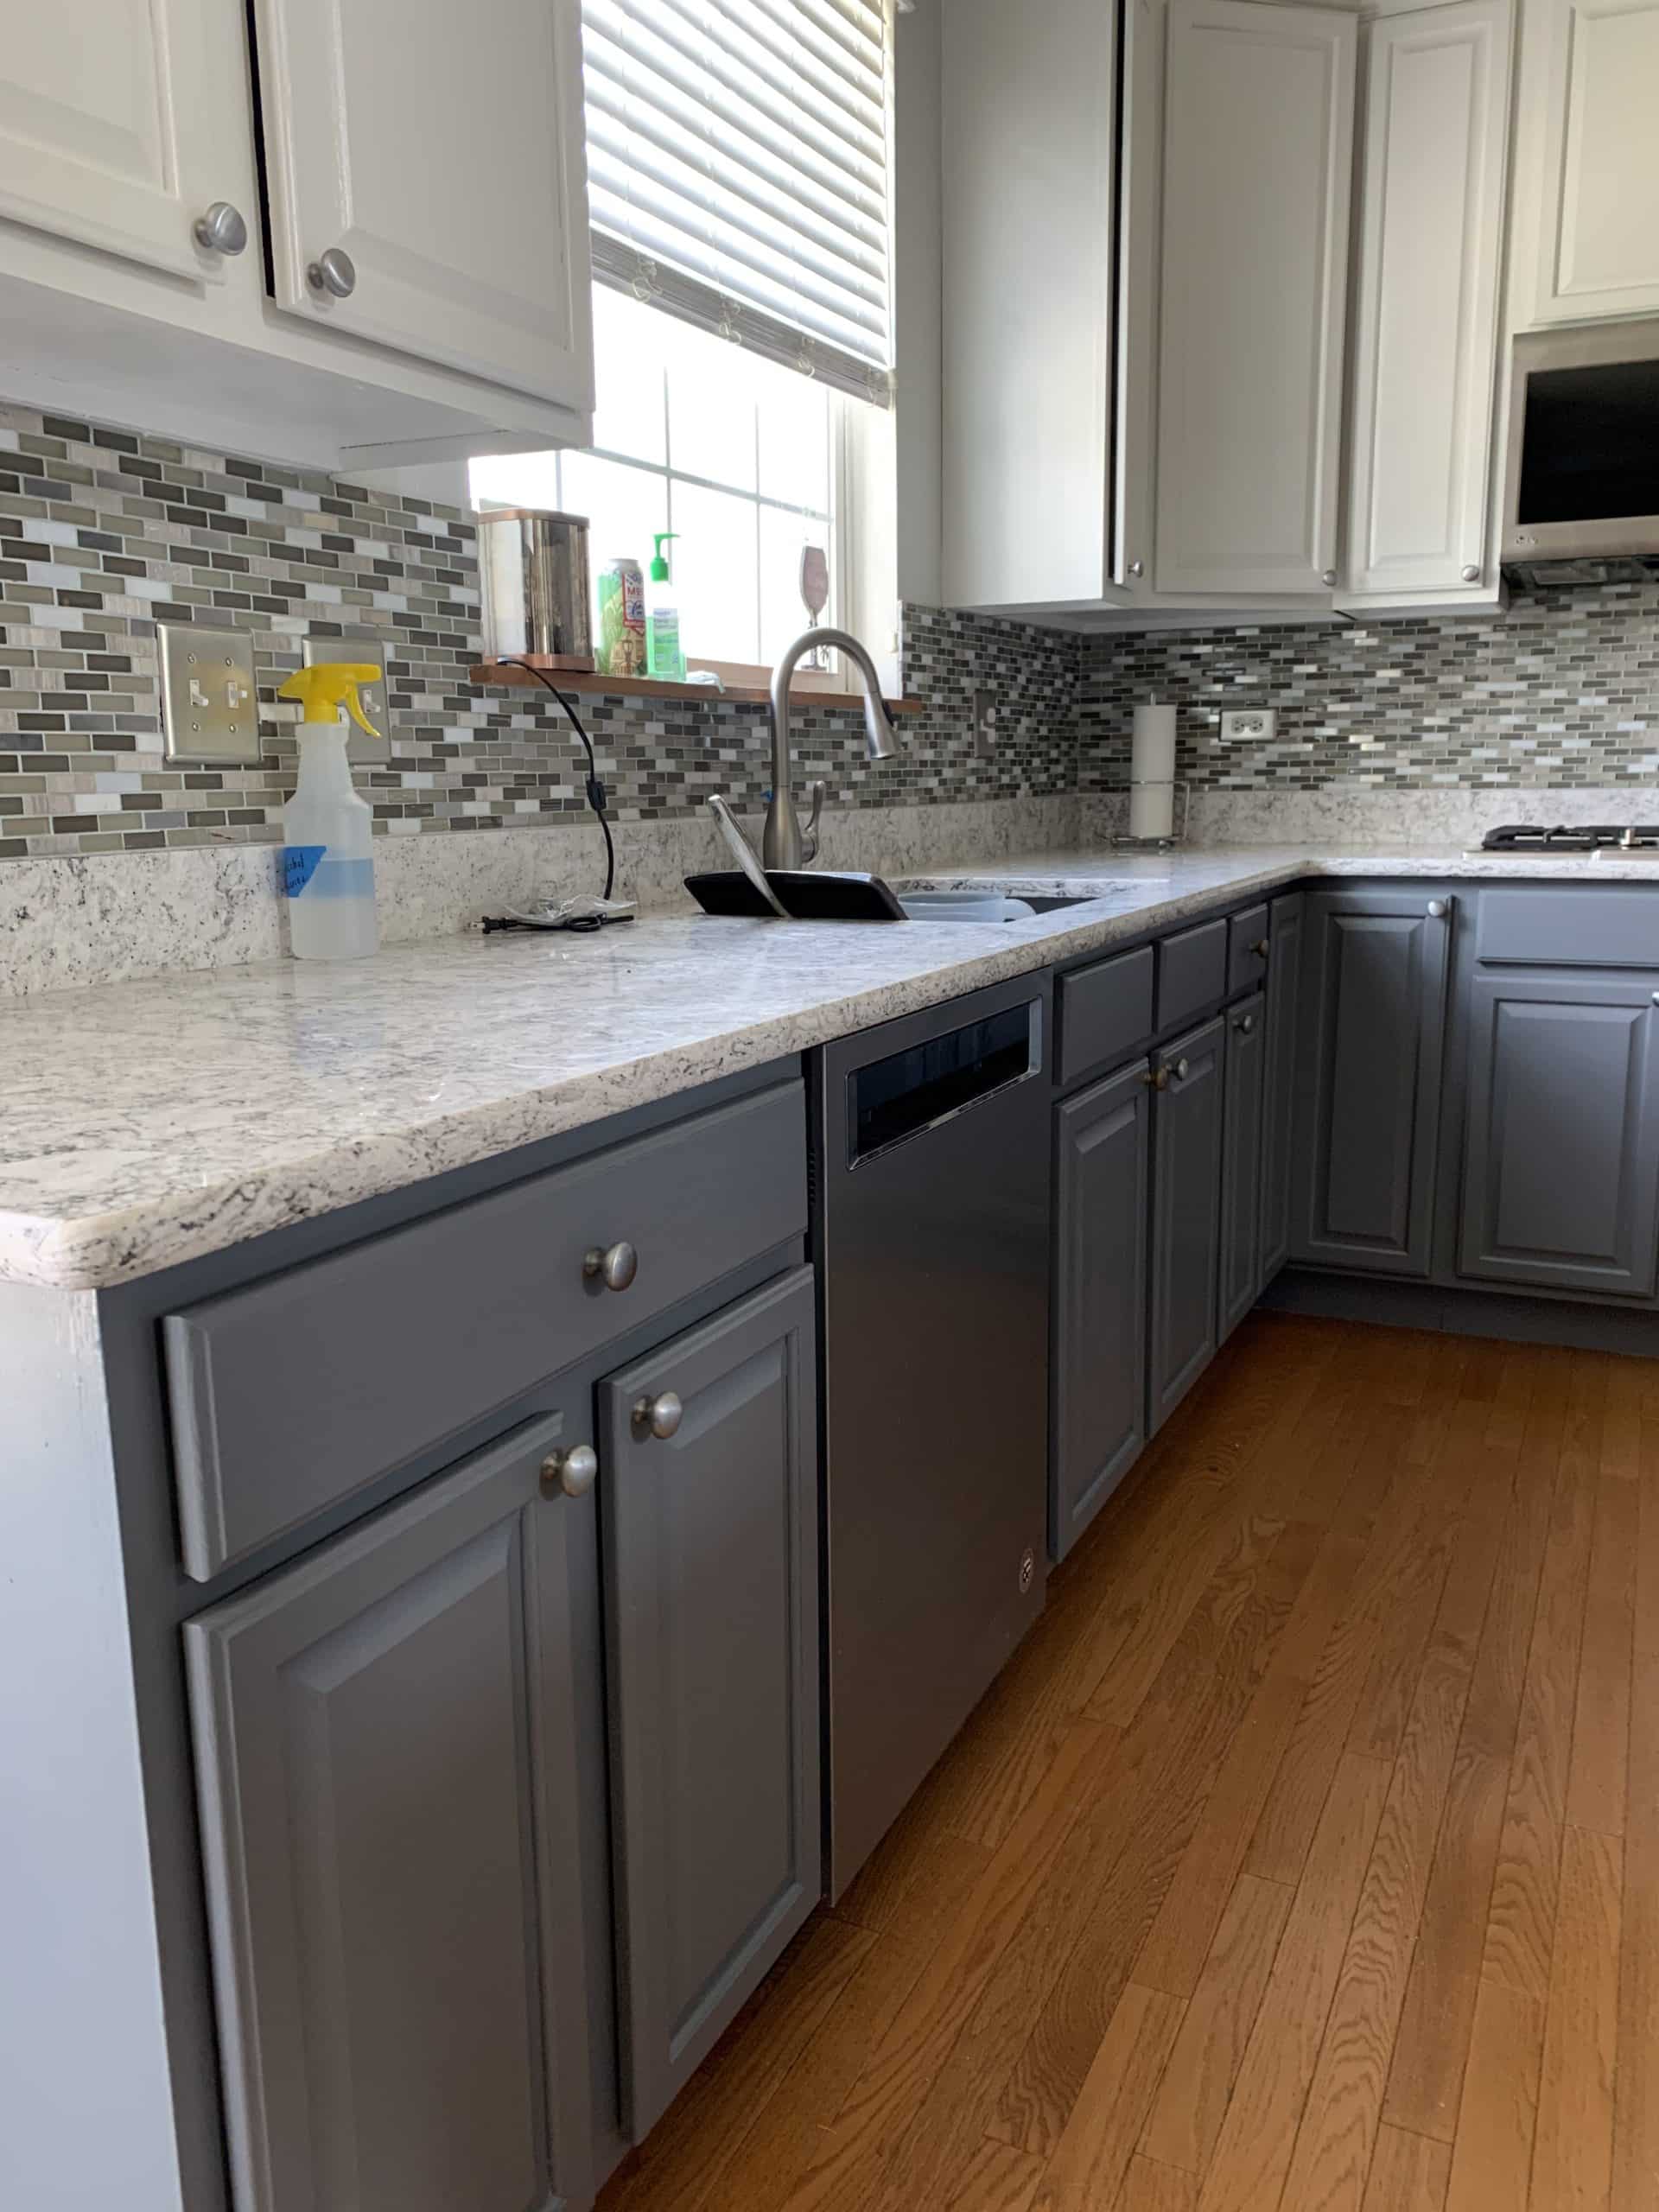 5 ways to remodel your kitchen vs replacing your cabinets - kitchen cabinet refinishing